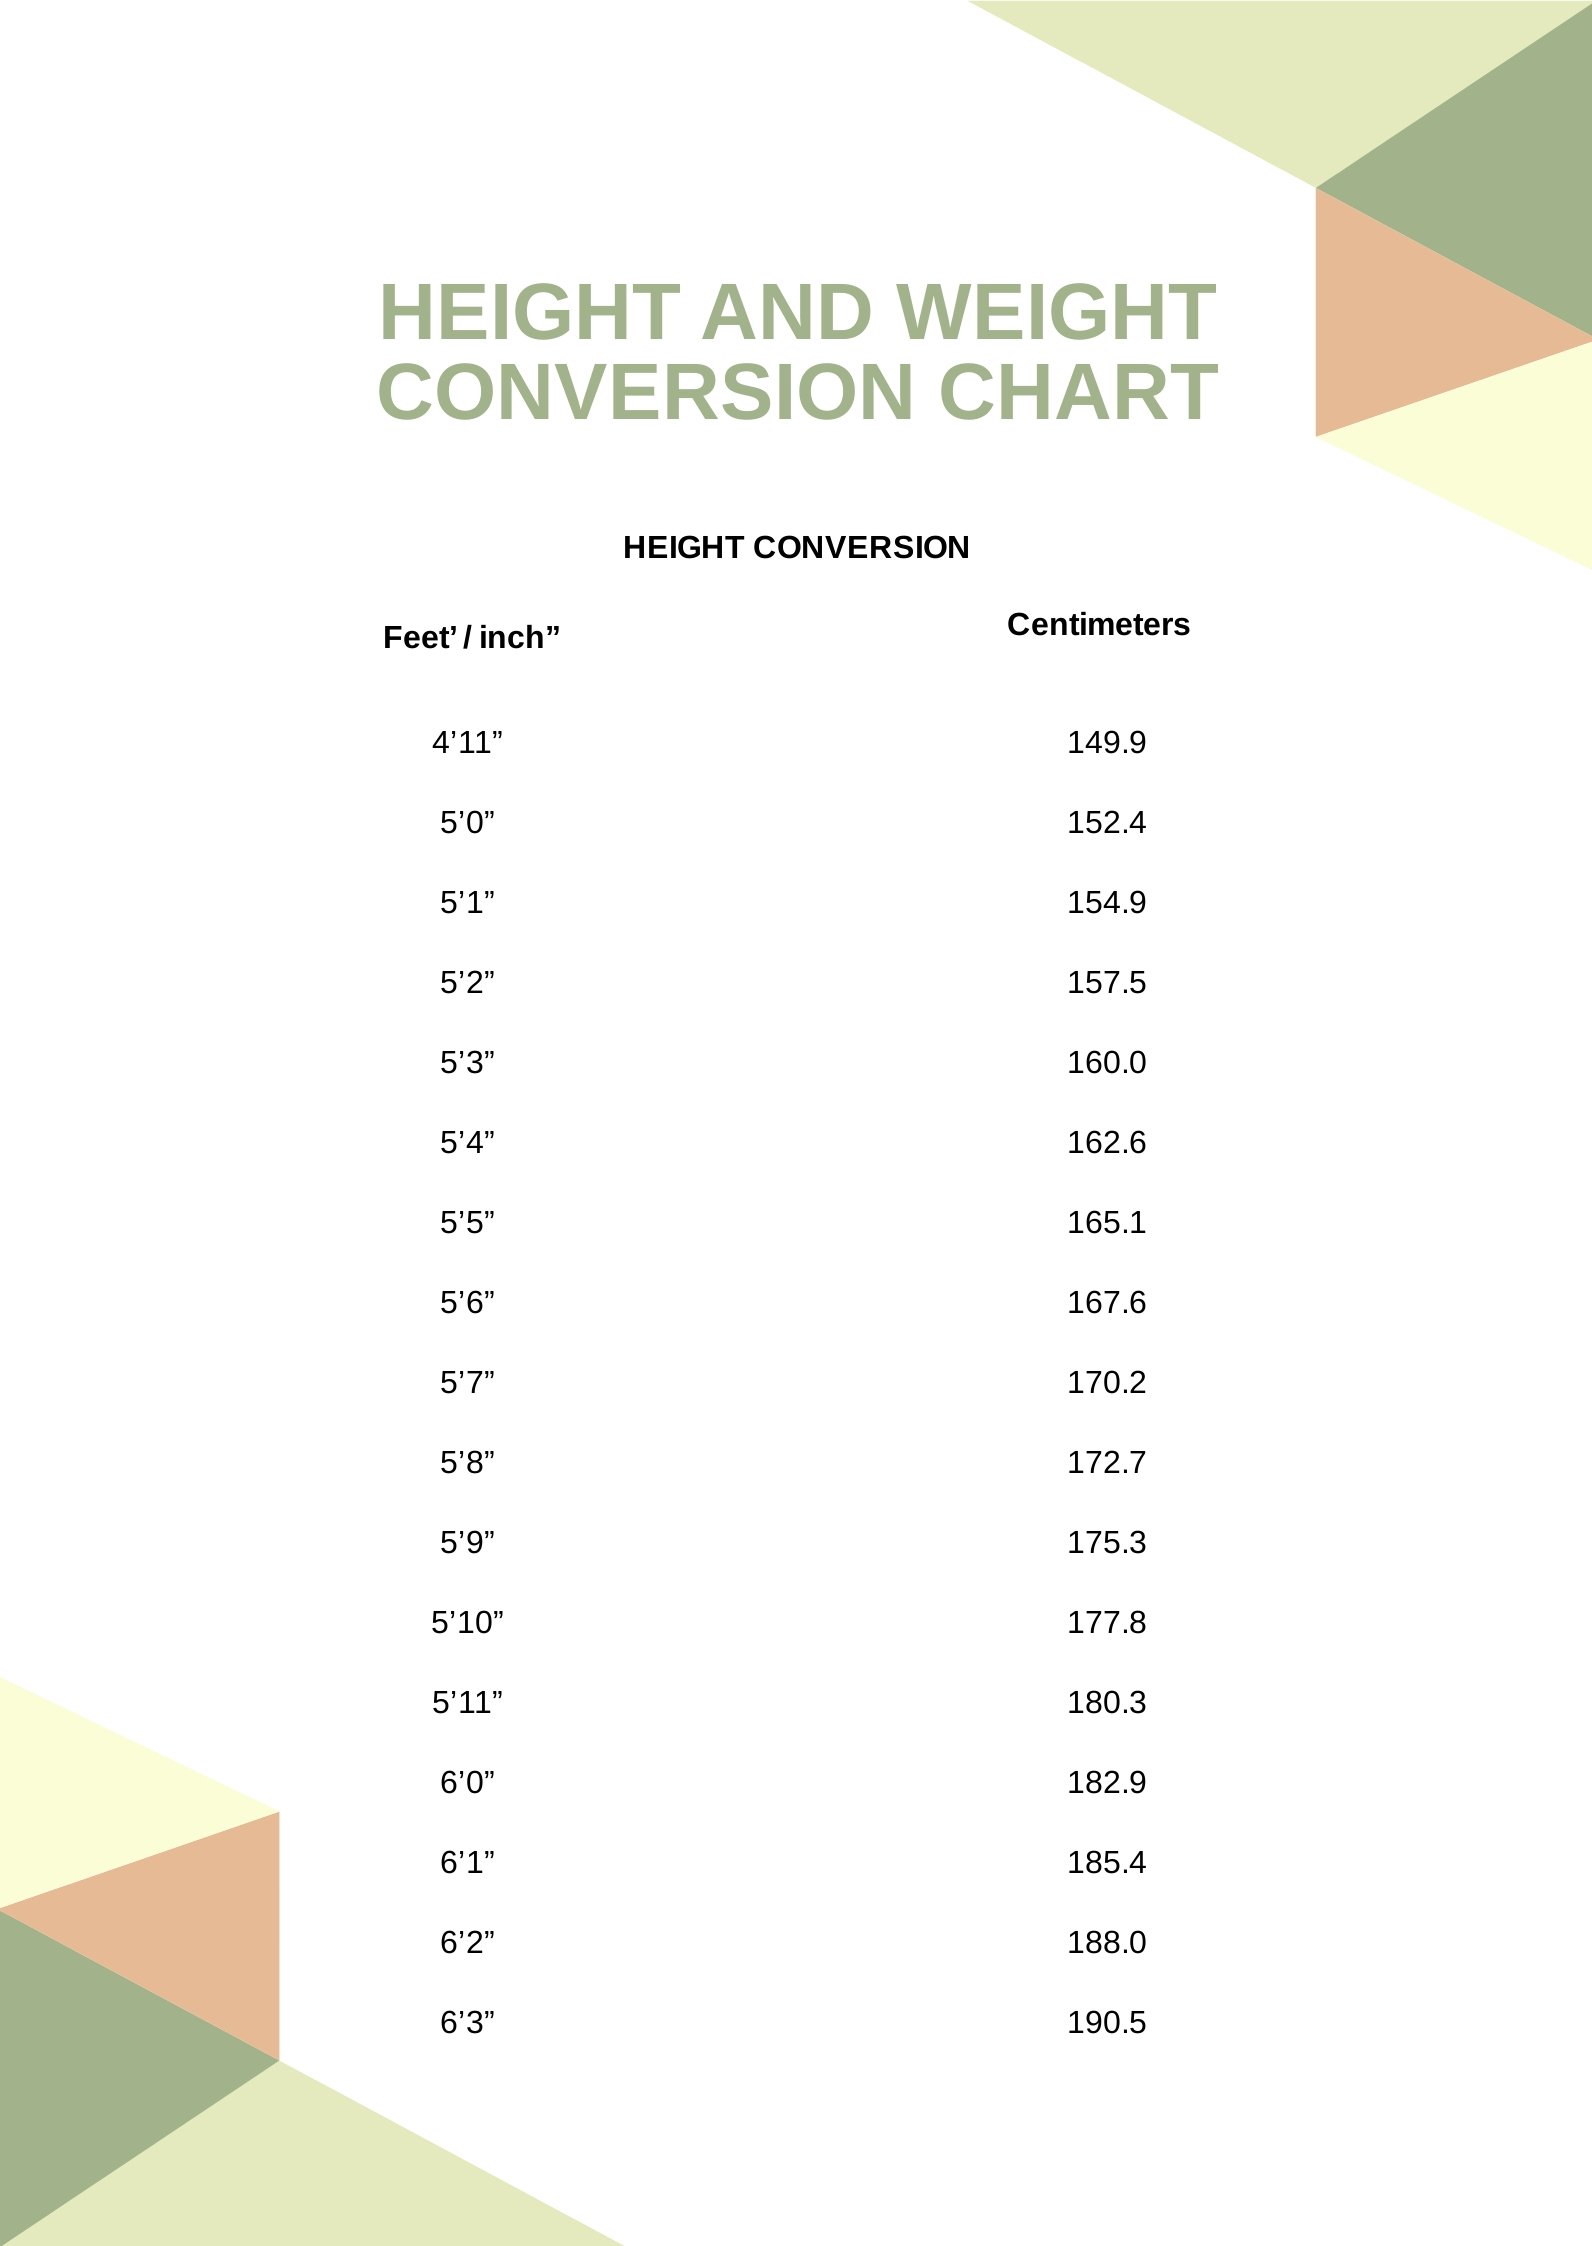 Height and Weight Metric Conversion Chart